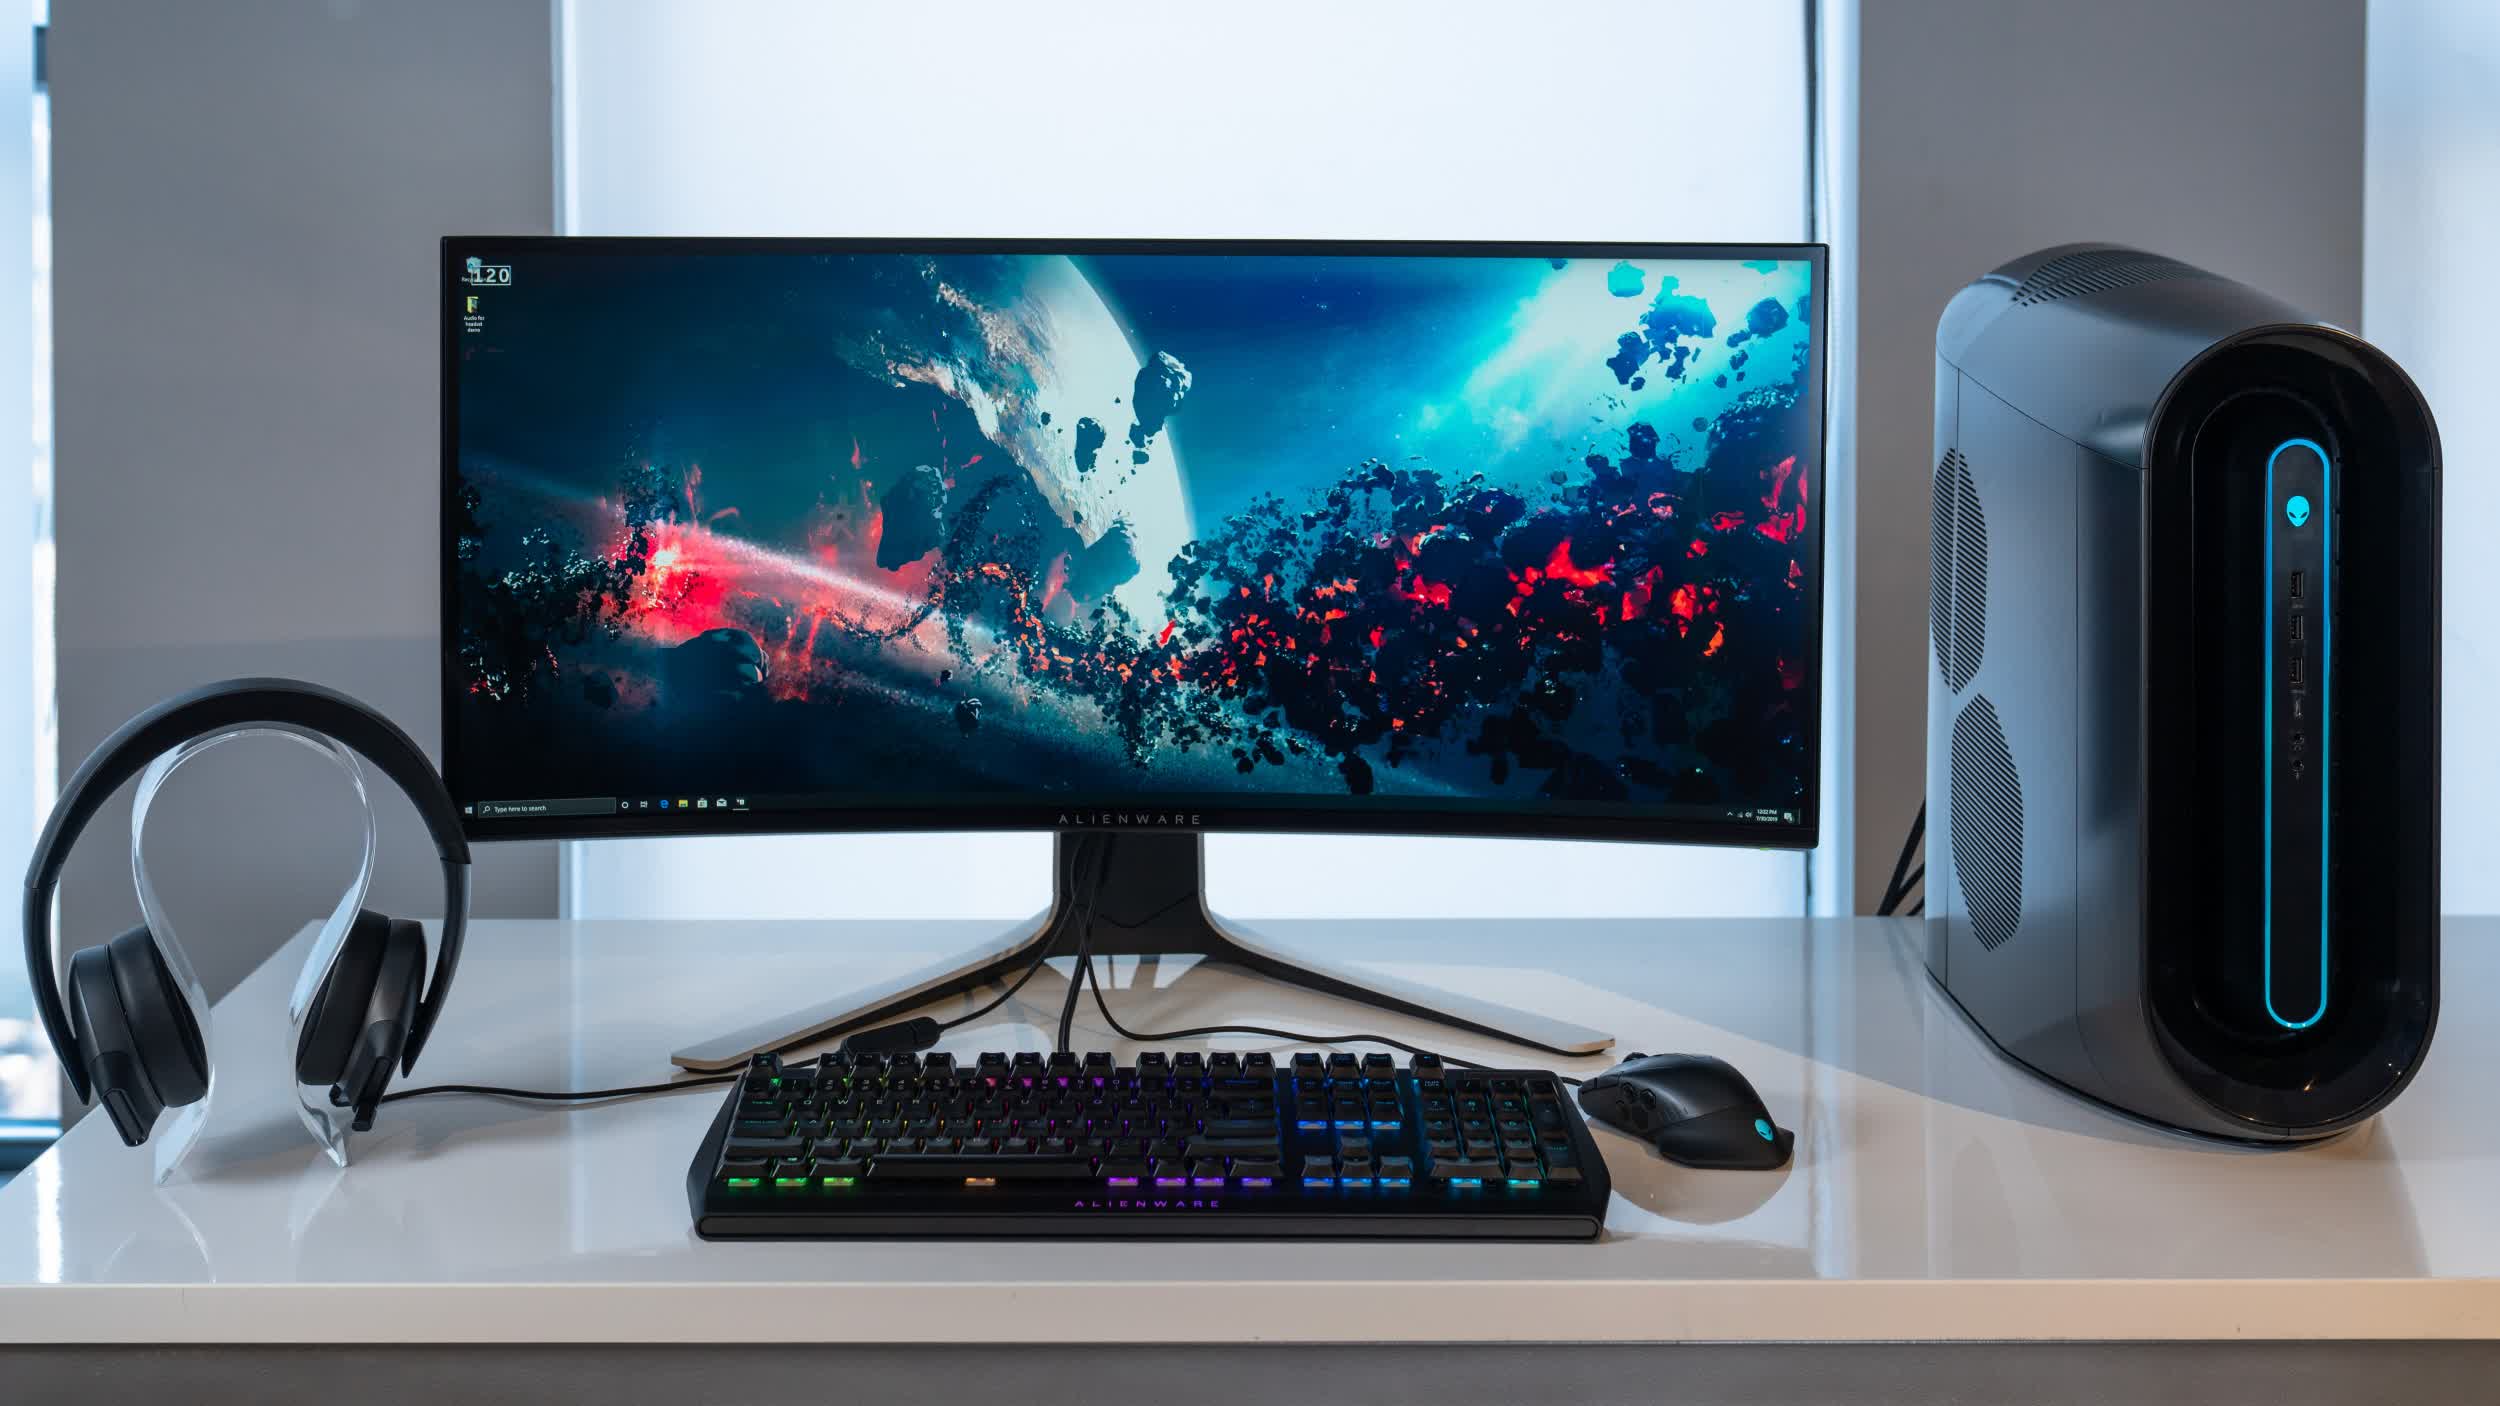 PC market to reach nearly 345 million units shipped in 2021, but growth to slow in subsequent years